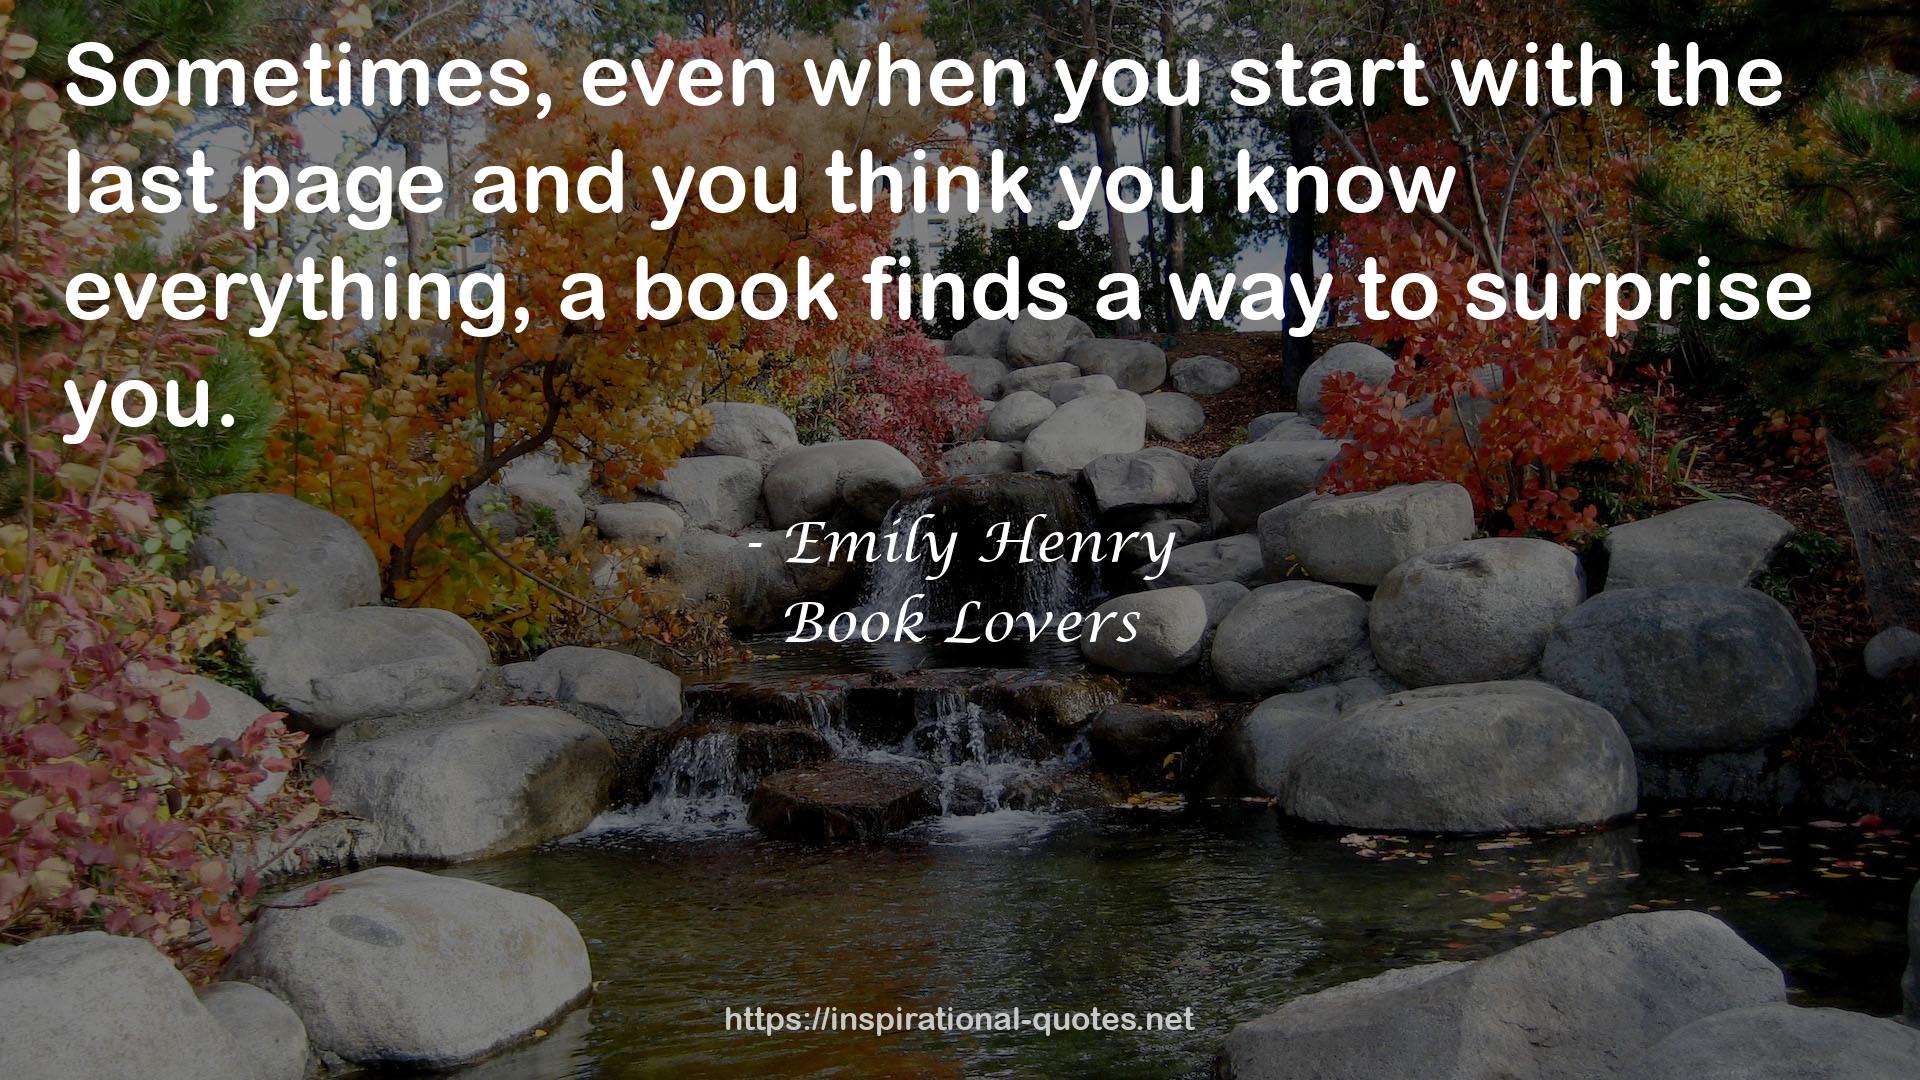 Emily Henry QUOTES